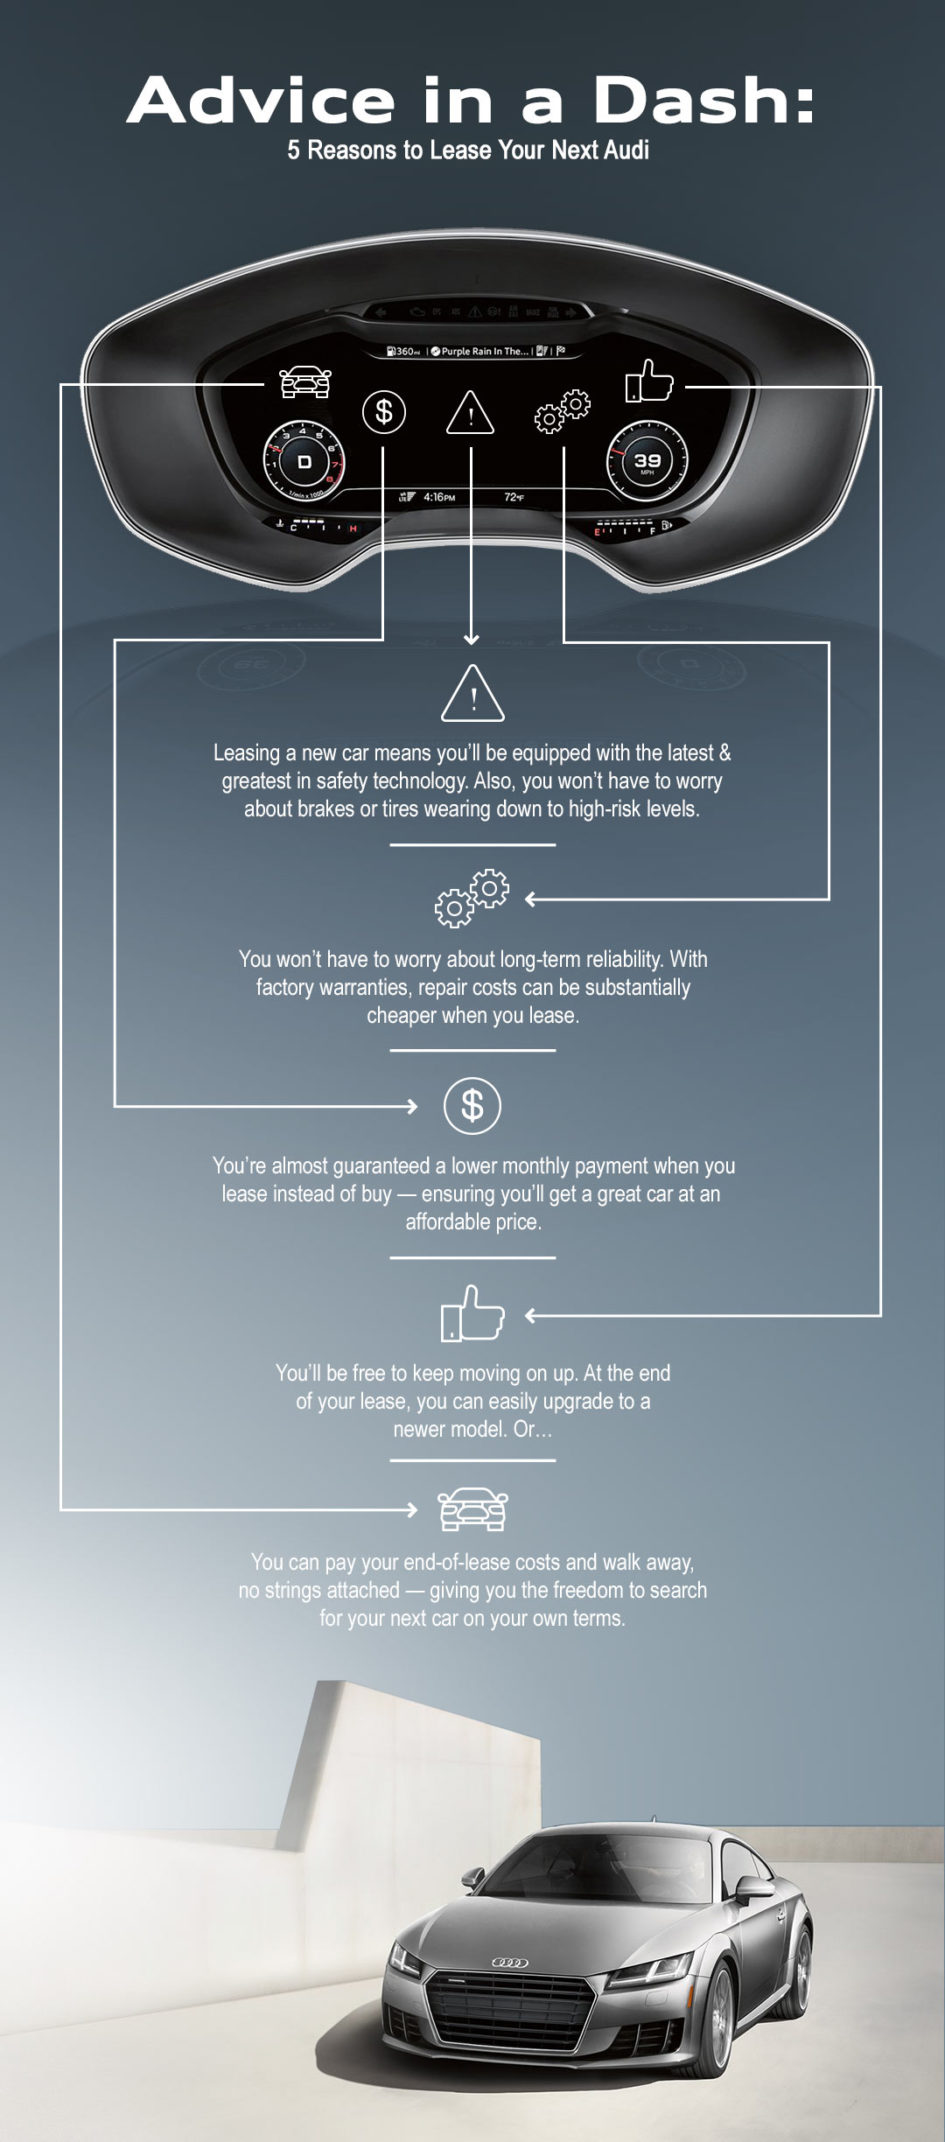 An infographic outlining five reasons to lease your next Audi